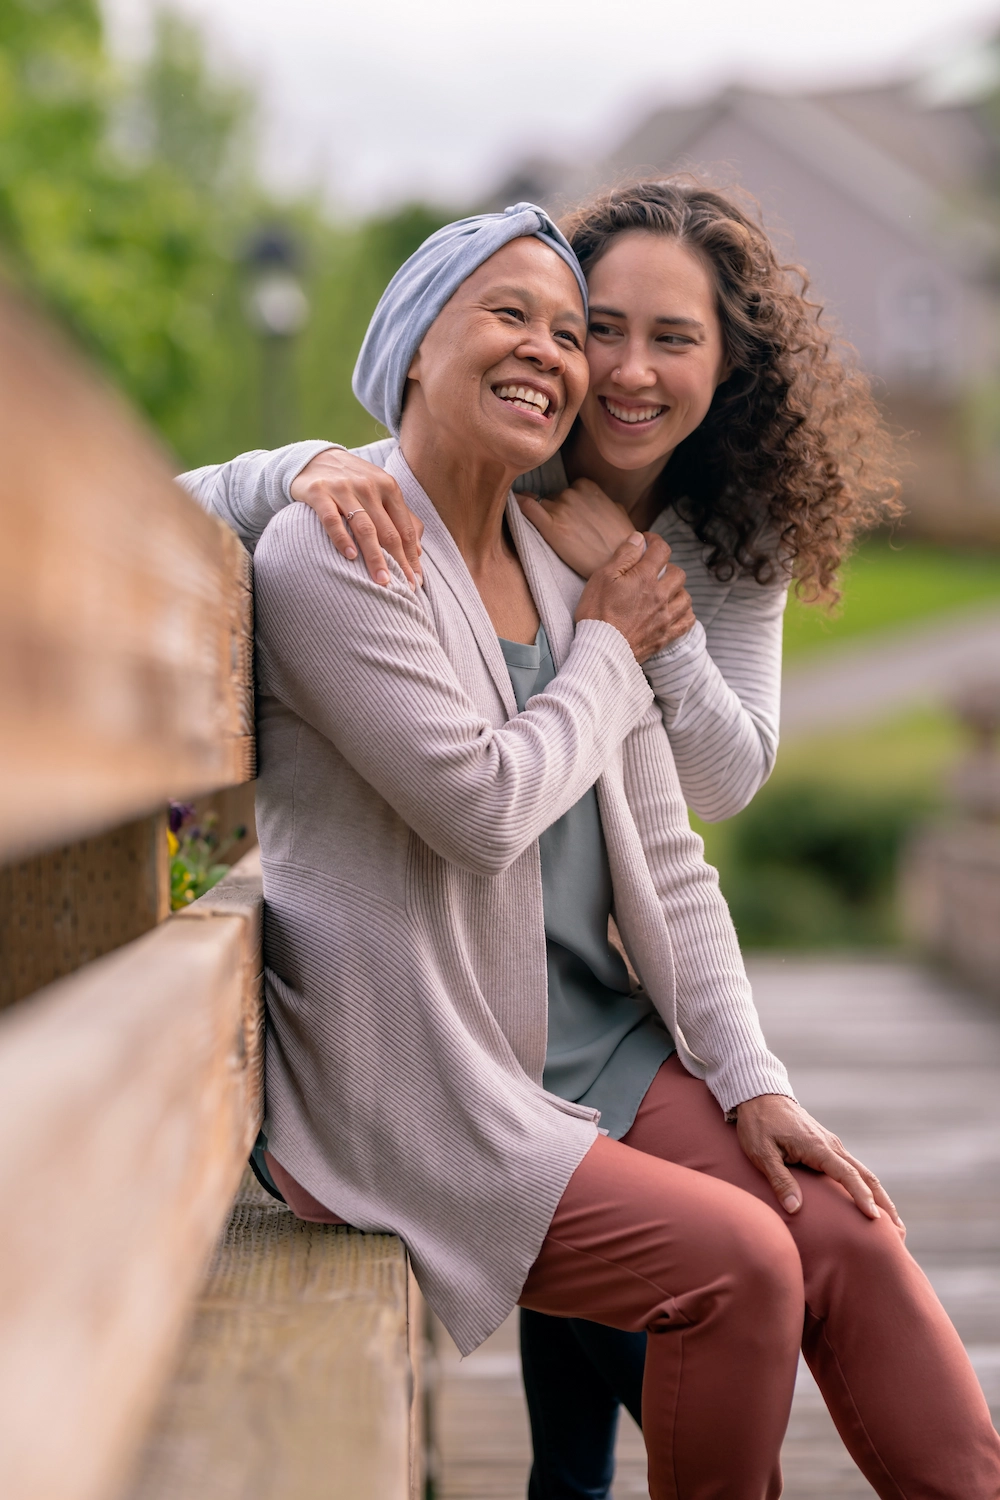 A senior woman with cancer is embraced and comforted by her adult daughter as they stand outside on a spring evening.